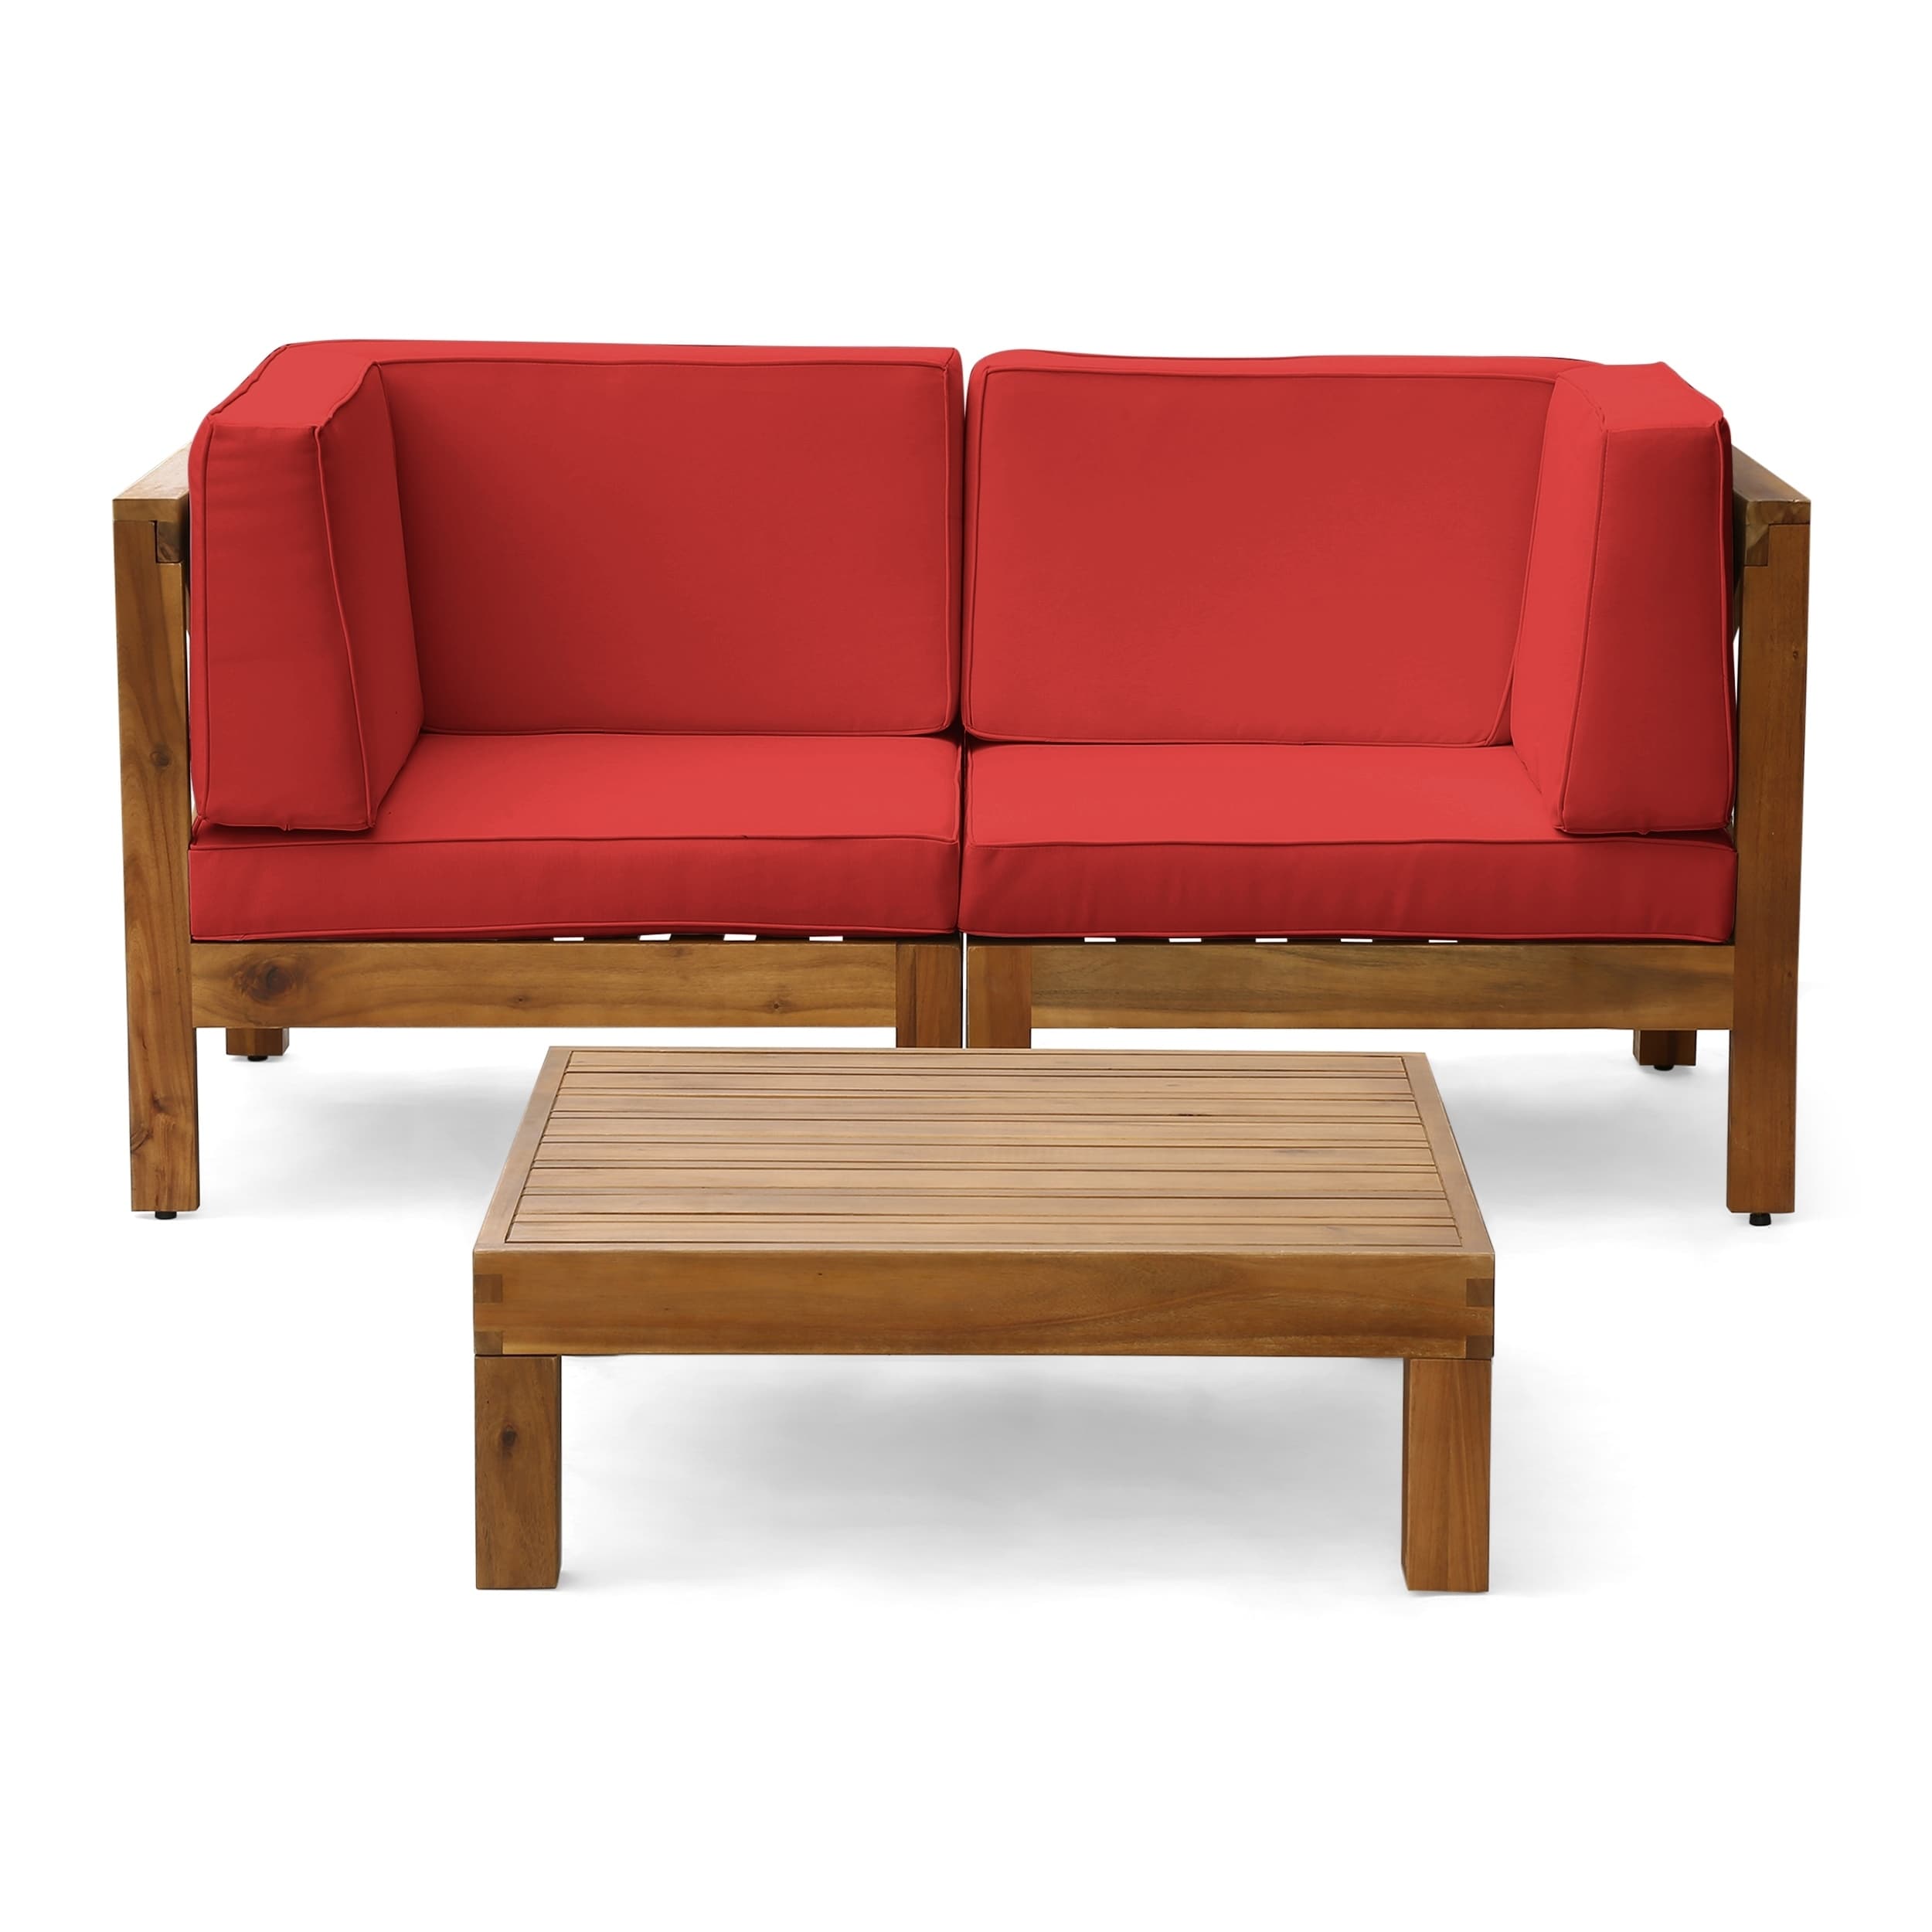 Oana Outdoor 2-seater Acacia Wood Sectional Loveseat And Coffee Table Set With Cushions By Christopher Knight Home